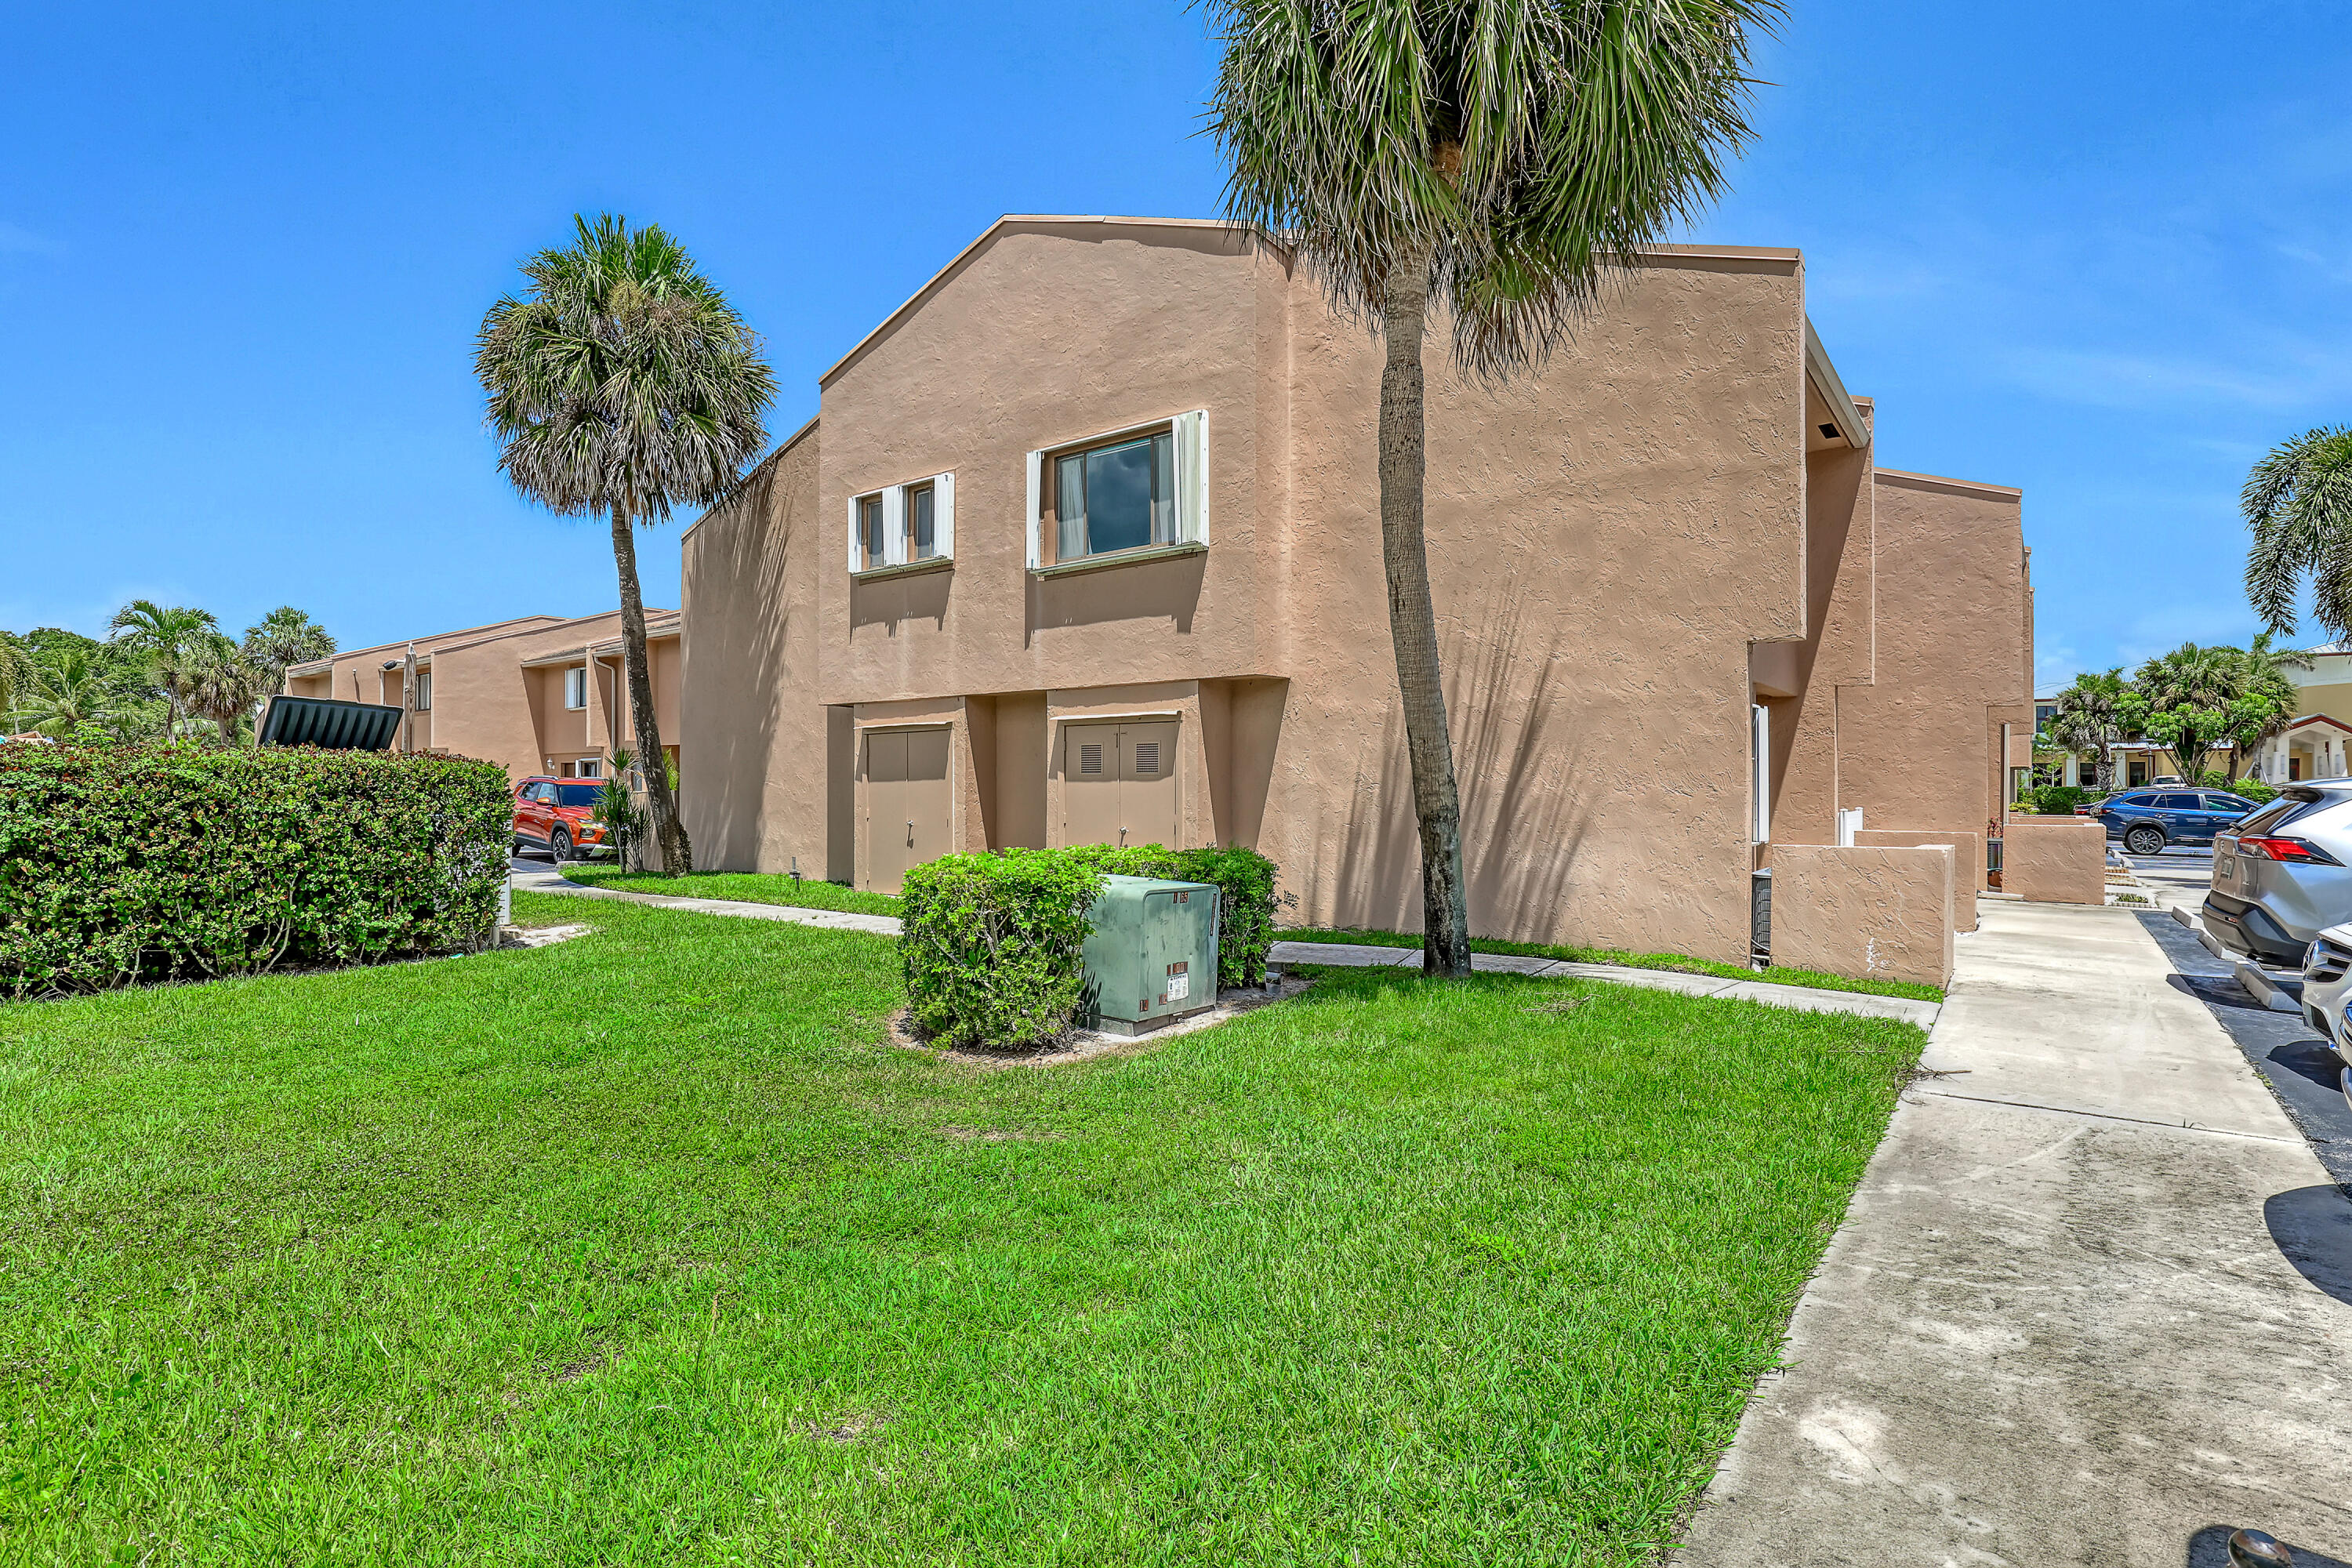 Property for Sale at 139 Sparrow Drive 2A, Royal Palm Beach, Palm Beach County, Florida - Bedrooms: 3 
Bathrooms: 2.5  - $294,900